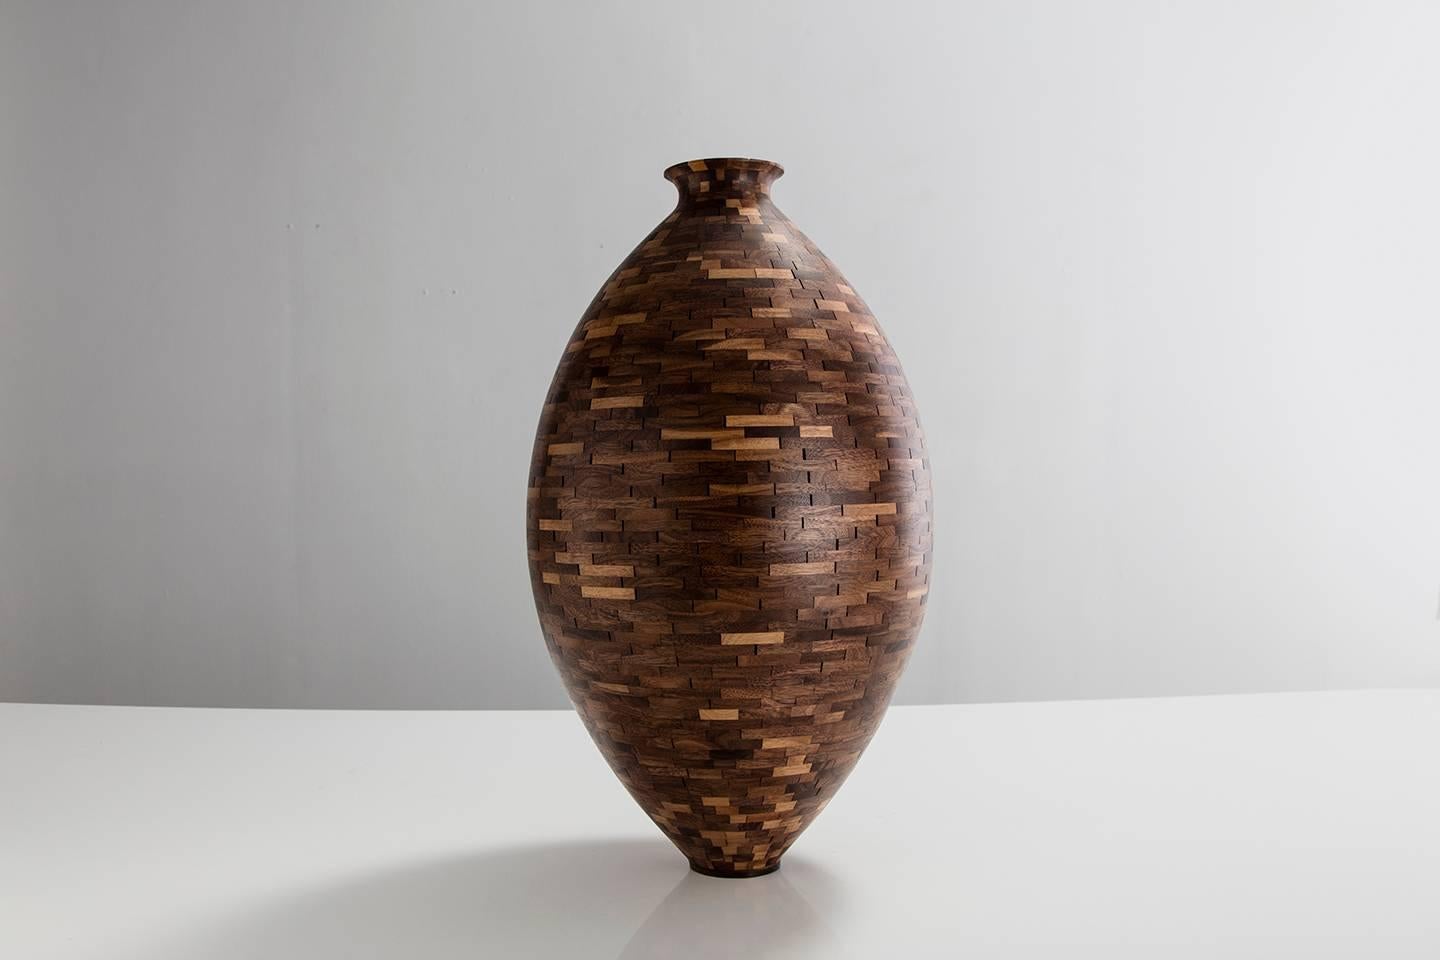 Part of Richard Haining's Stacked Collection, this traditional vase form was made using reclaimed walnut sourced and salvaged from a variety of local Brooklyn wood shops. The wood's natural coloring shows off warm tones ranging from mid to dark